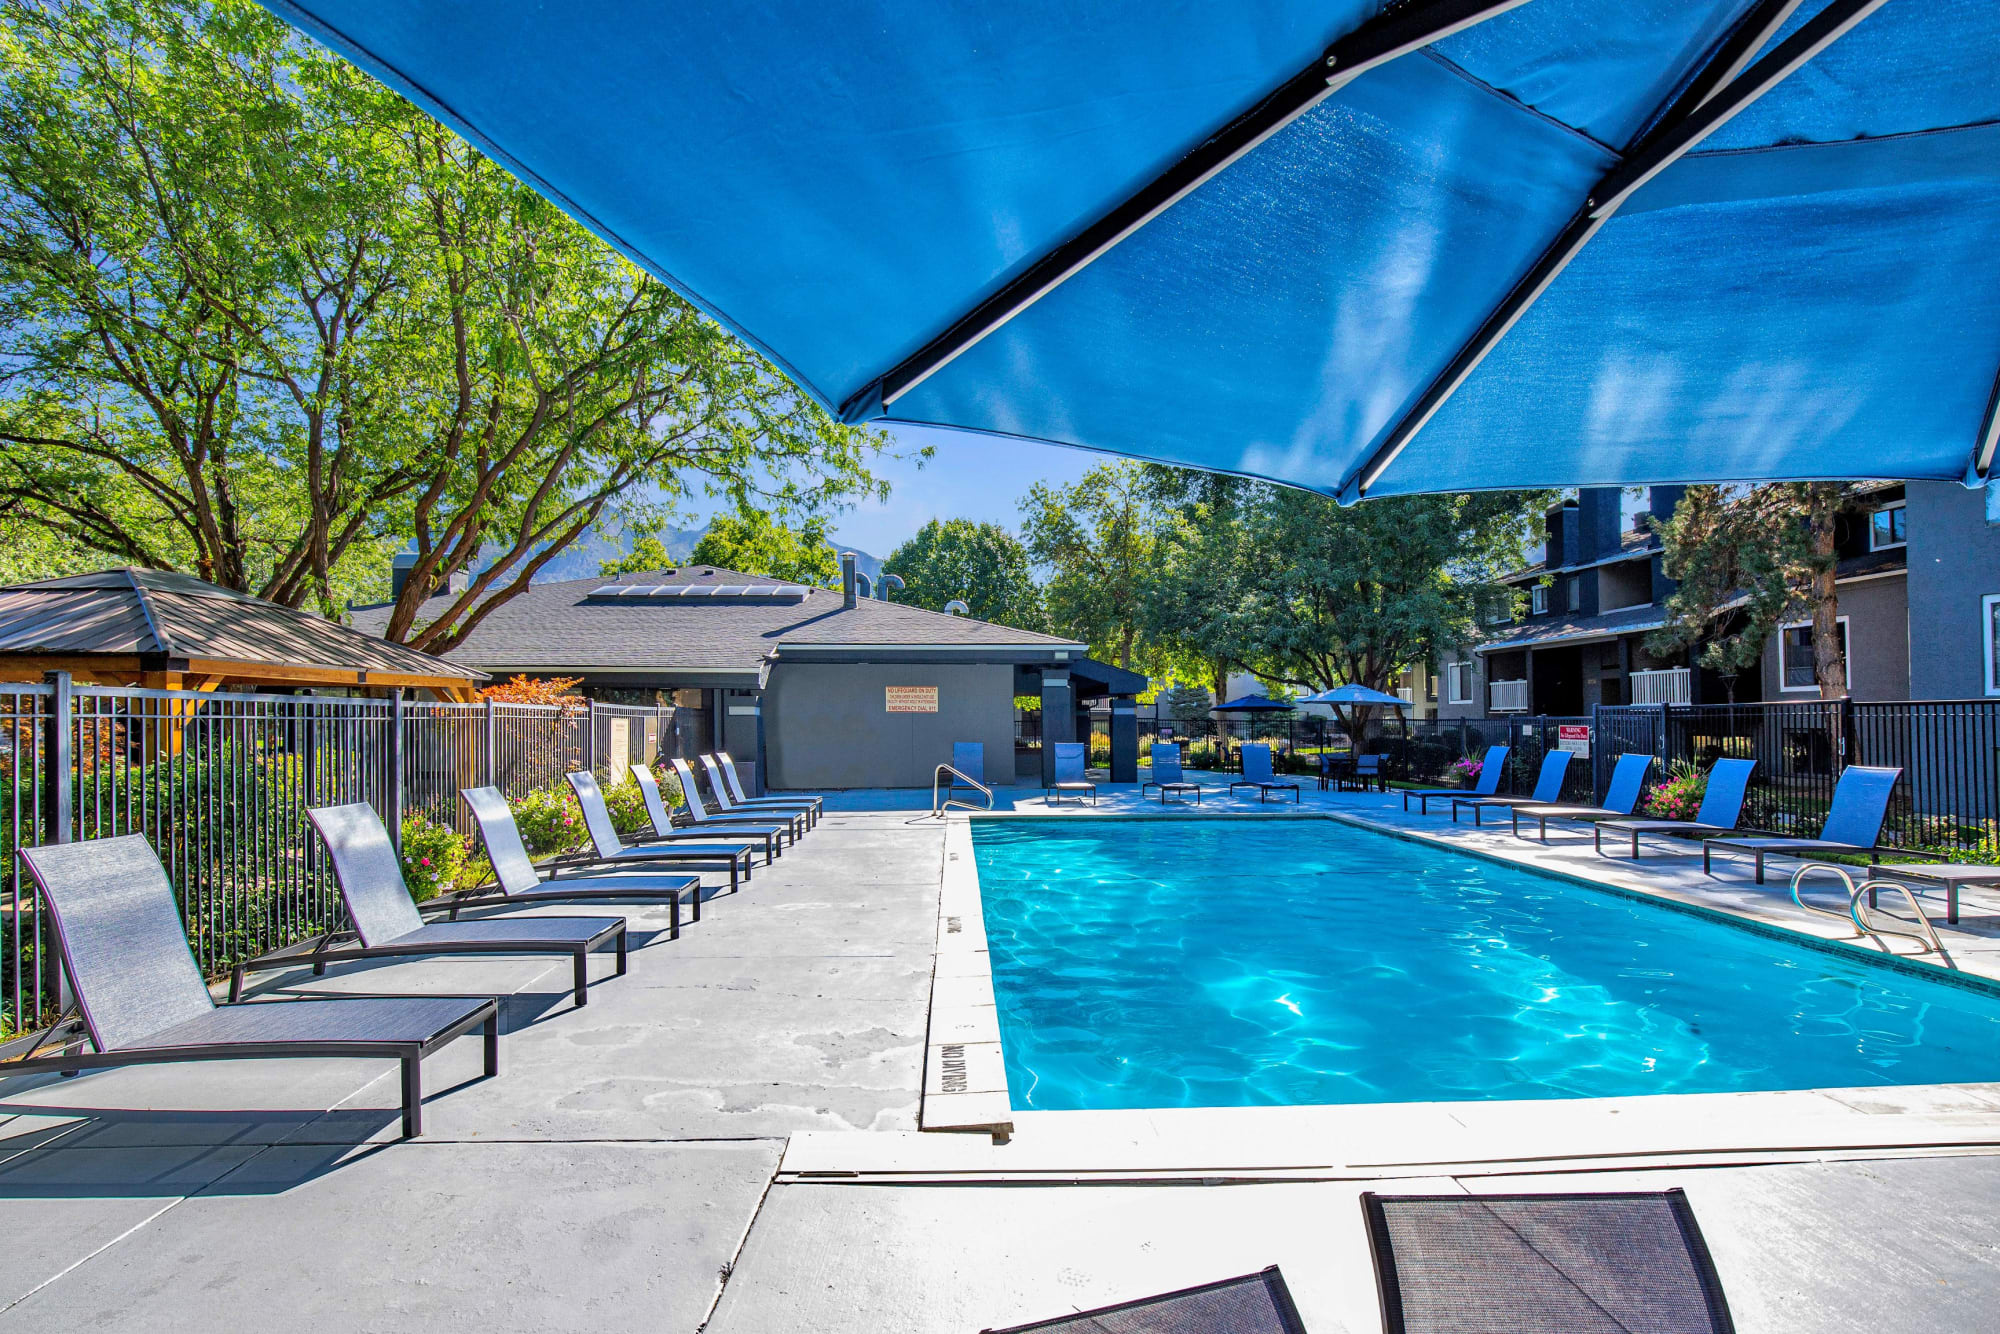 Pool with lounge chairs at Royal Farms Apartments in Salt Lake City, Utah